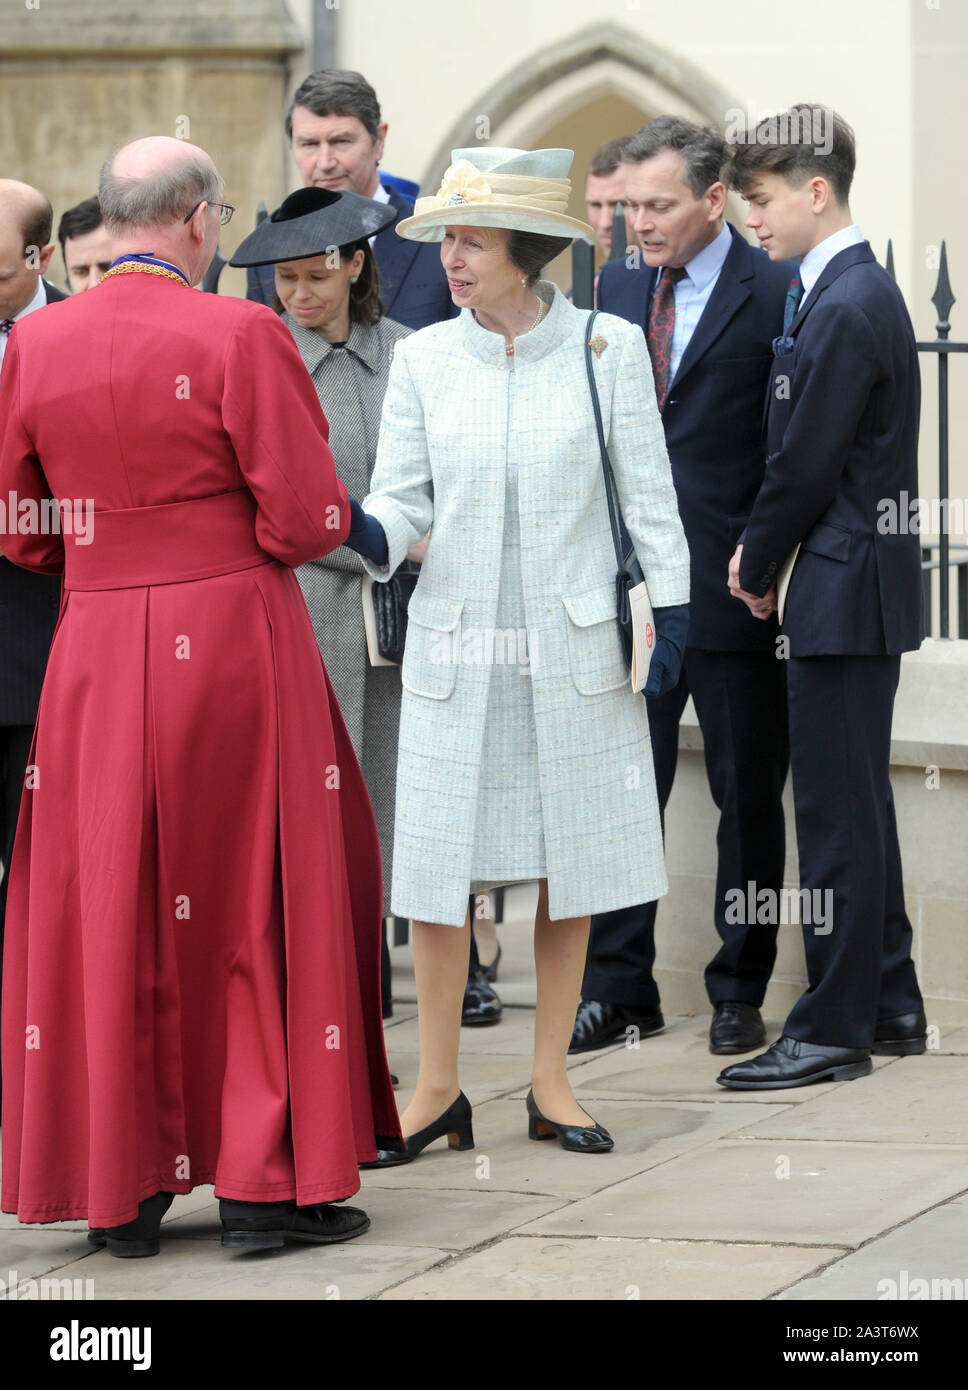 Photo Must Be Credited ©Kate Green/Alpha Press 079671 05/04/2015 Dean of Windsor Rt Revd David Conner, Princess Anne, Lady Sarah Chatto and Daniel Chatto attend a Easter Day Church Service held at St George's Chapel, Windsor Castle Stock Photo